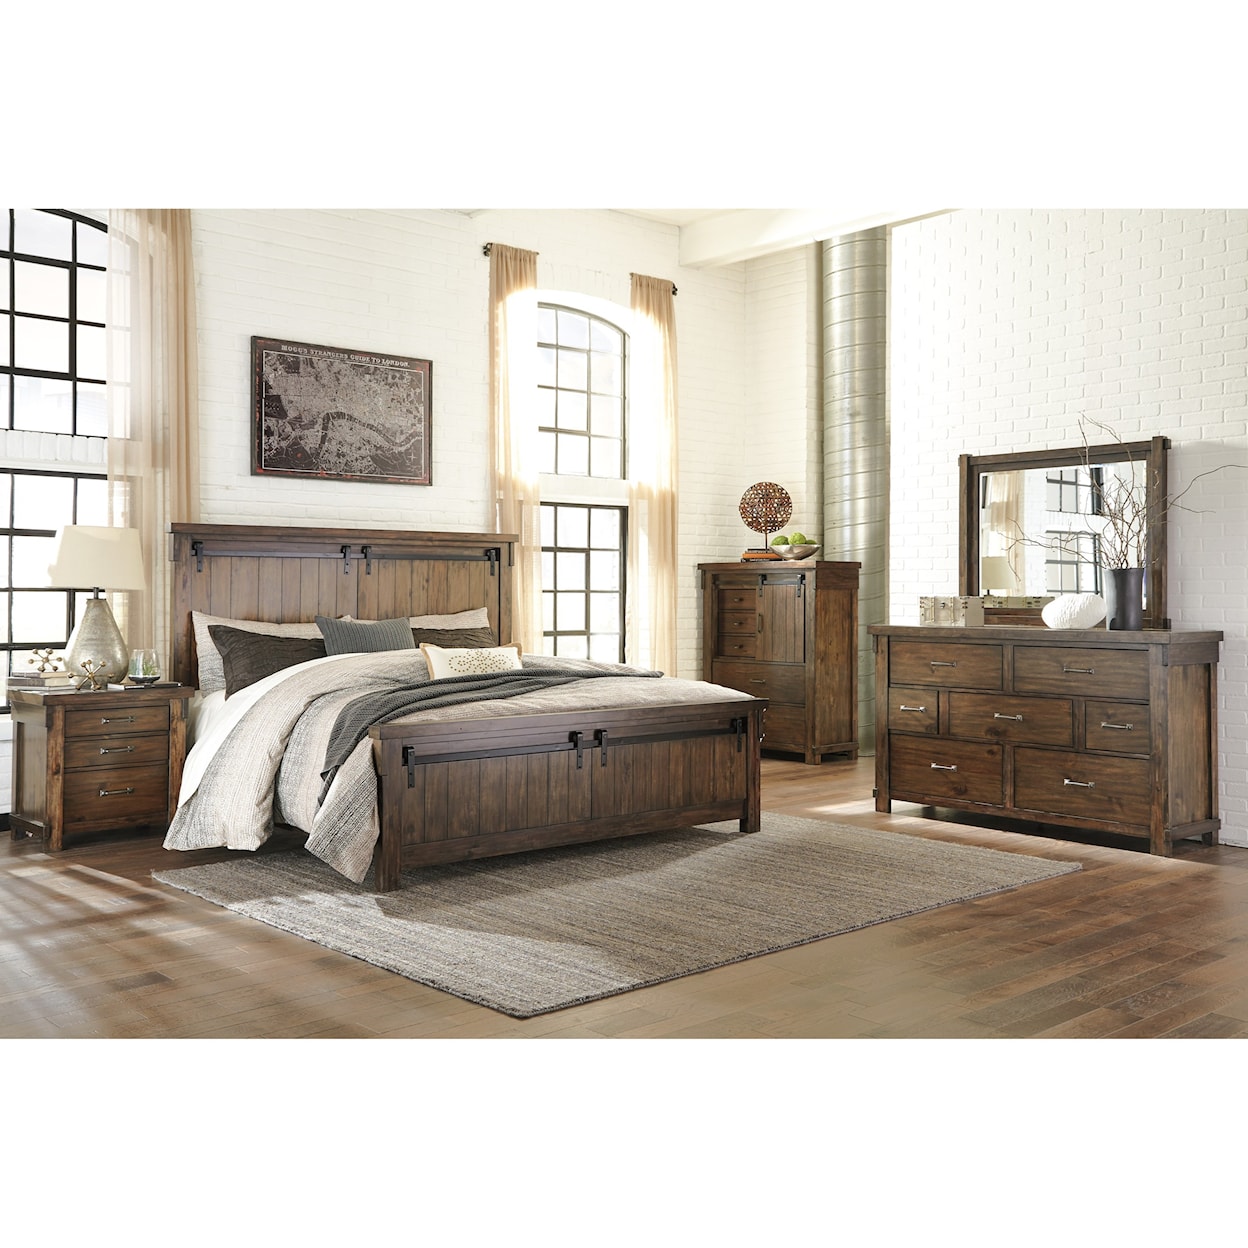 Signature Design by Ashley Lakeleigh Queen Panel Bed